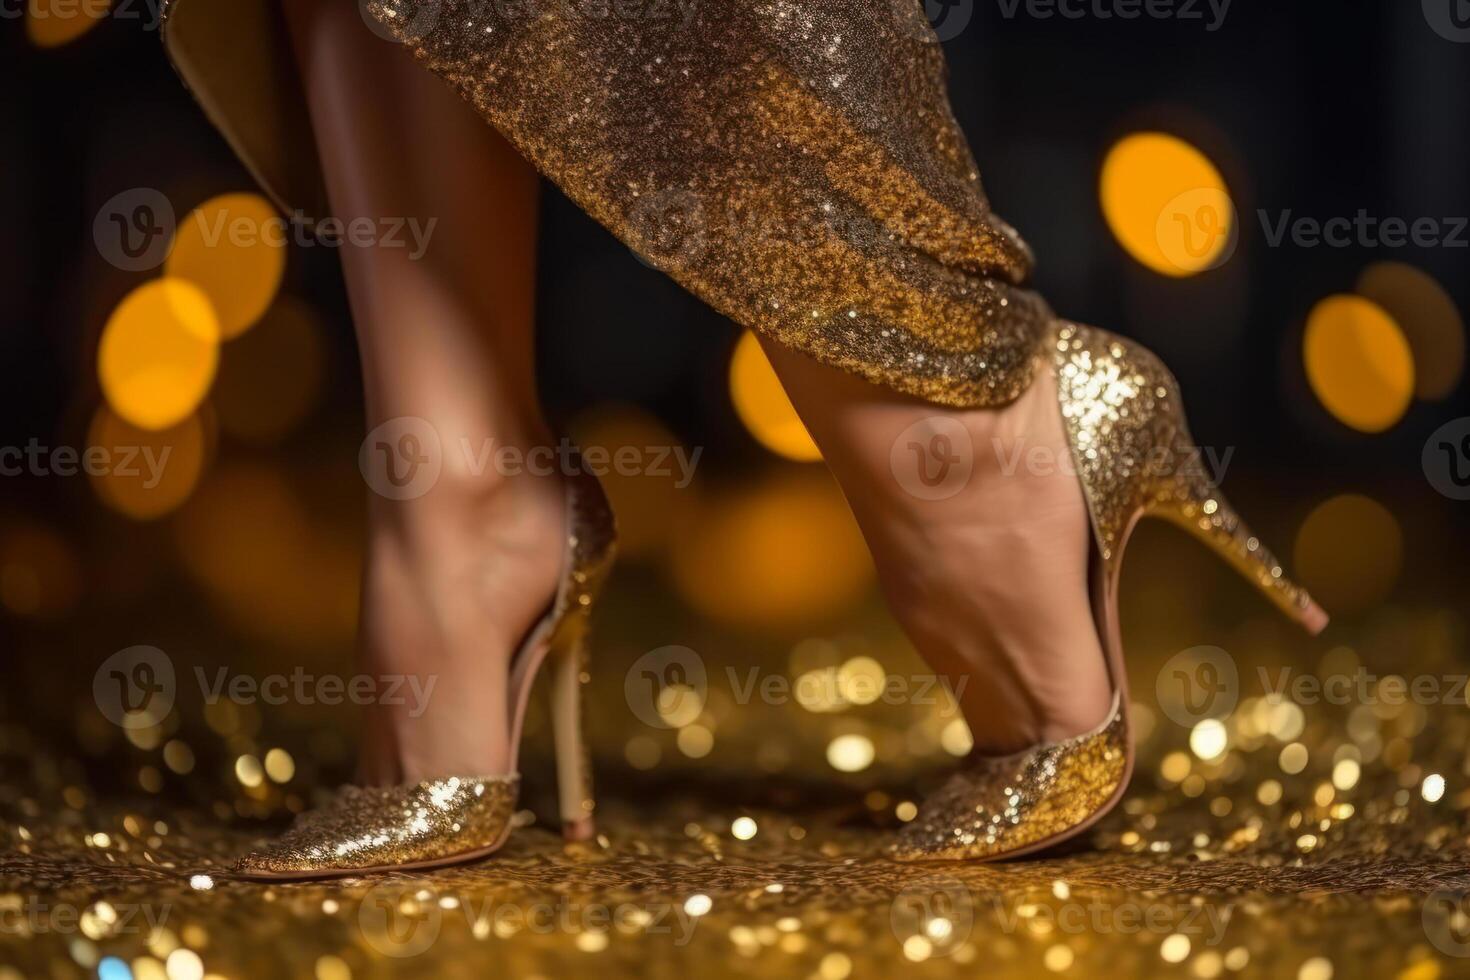 beautiful female legs in evening shoes with bokeh lights in the background photo